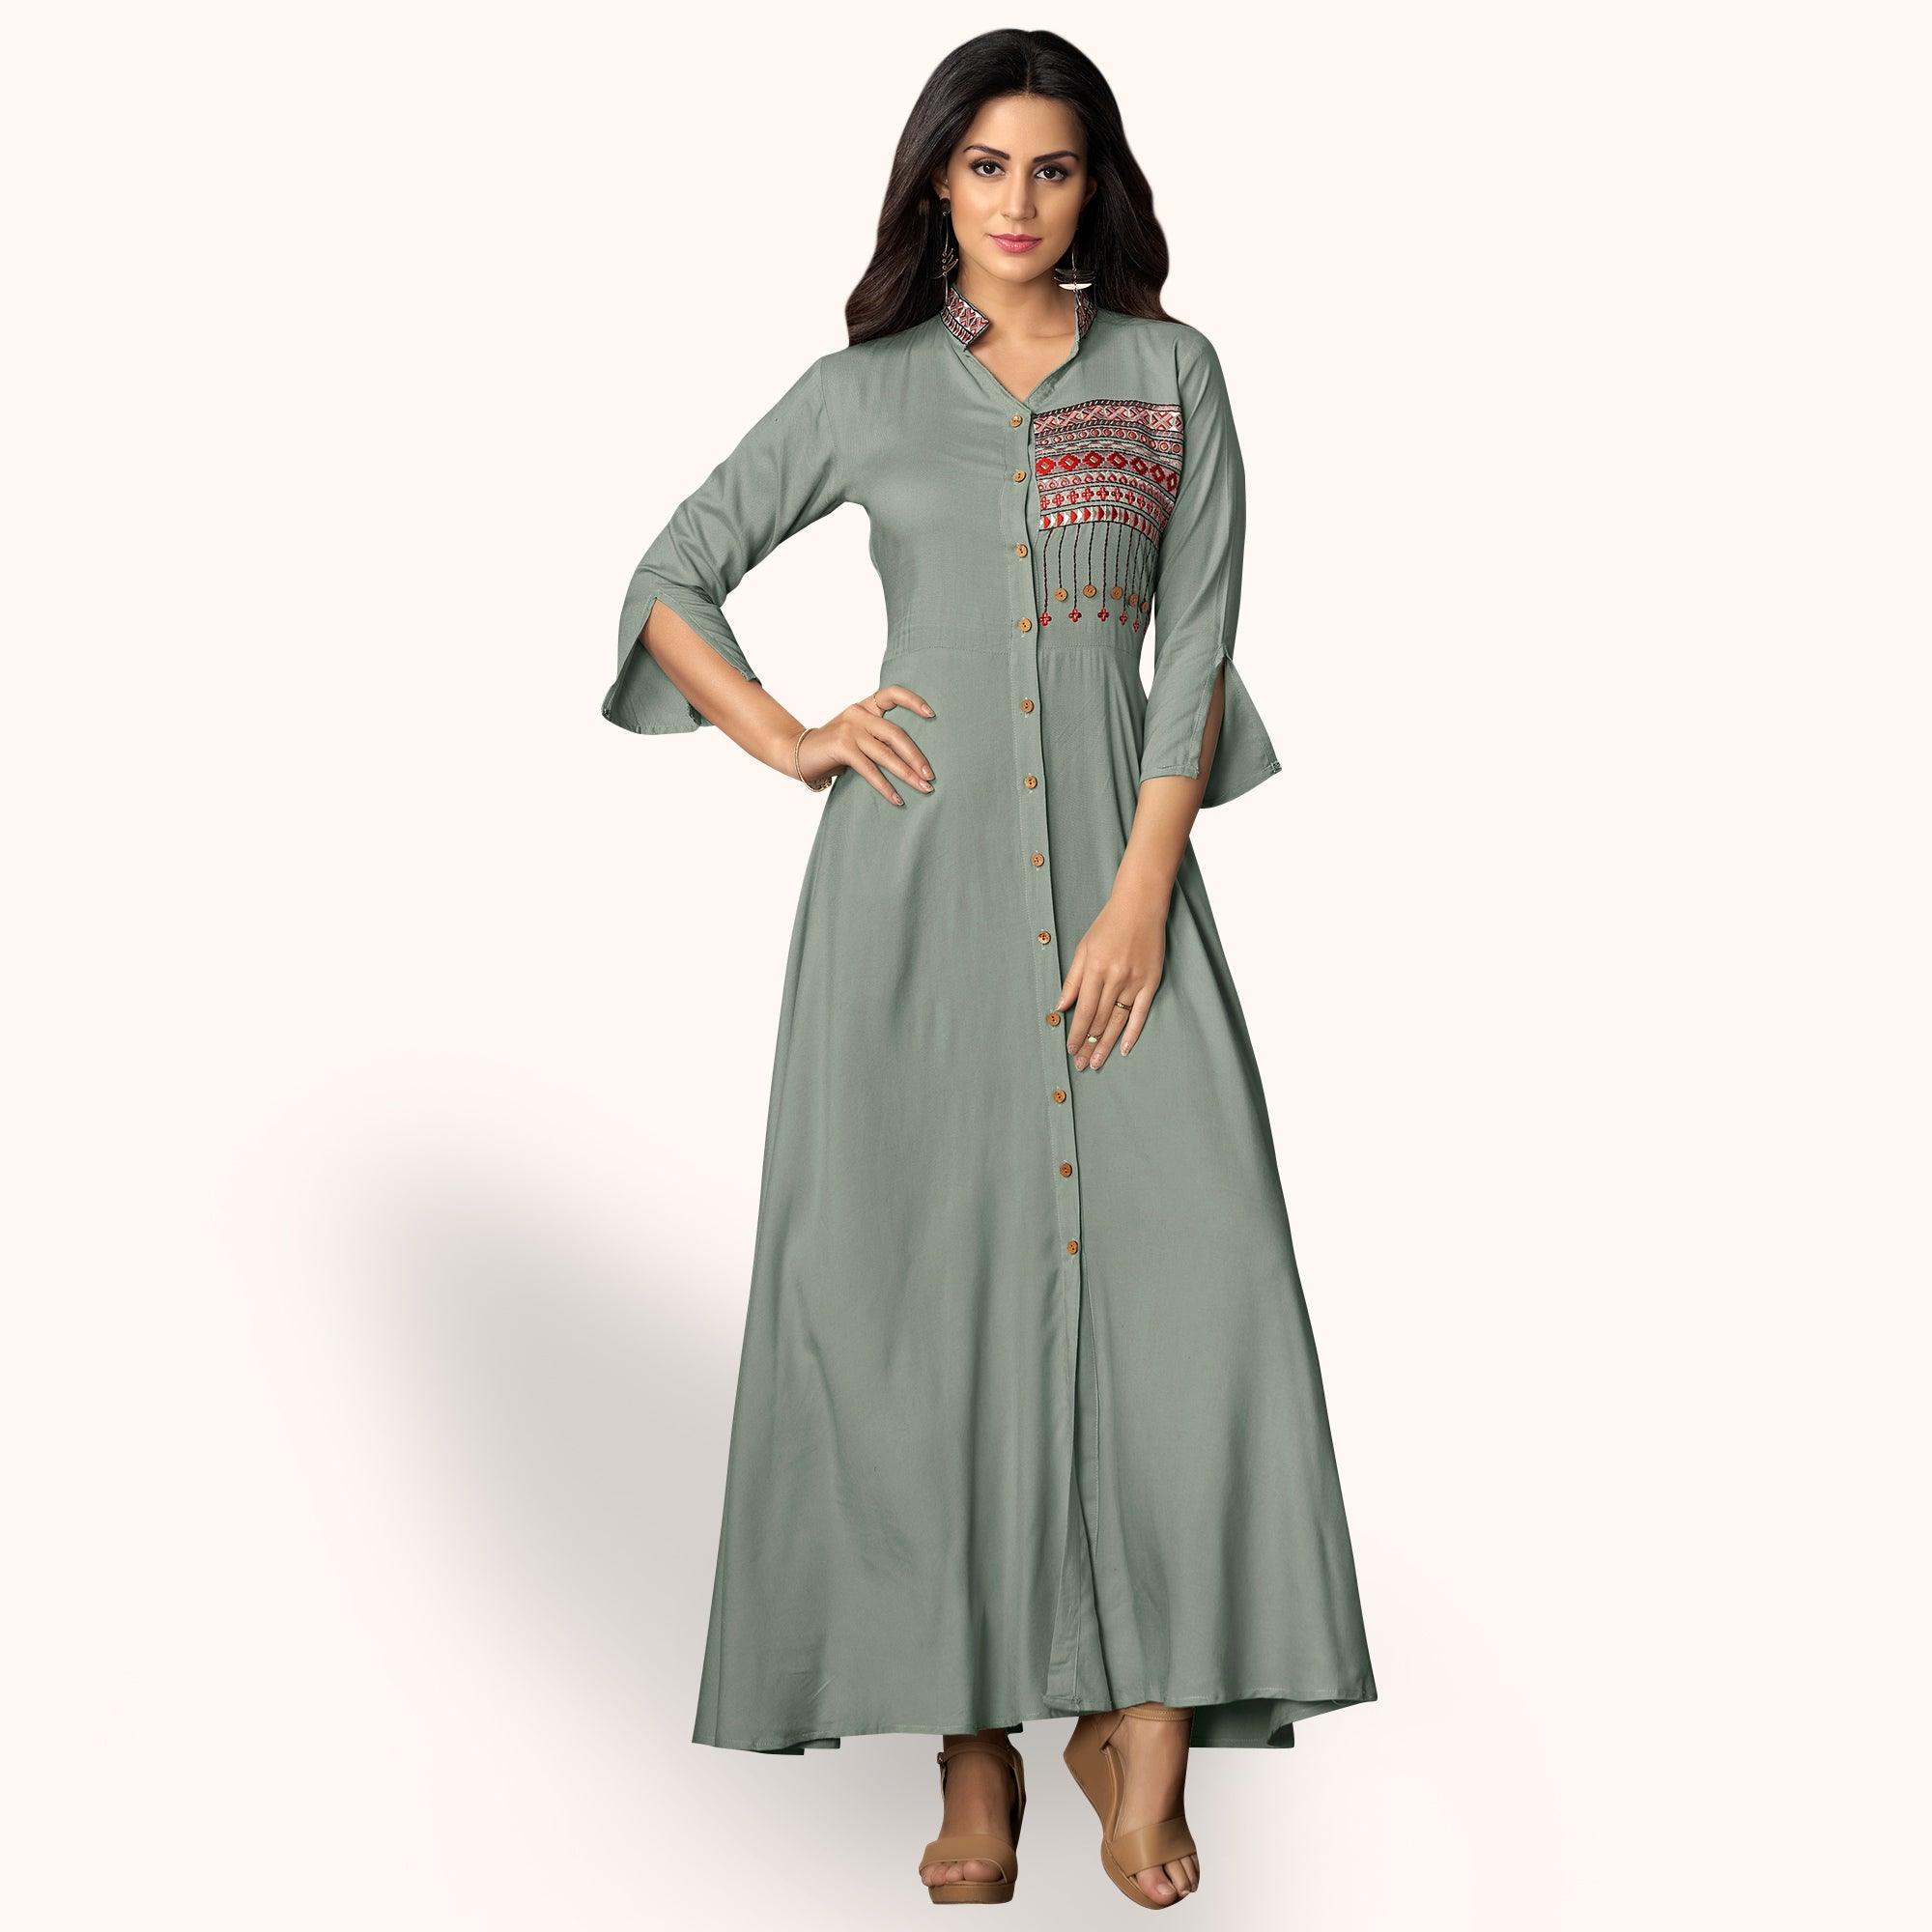 Delightful Gray Colored Partywear Embroidered Rayon Kurti - Peachmode